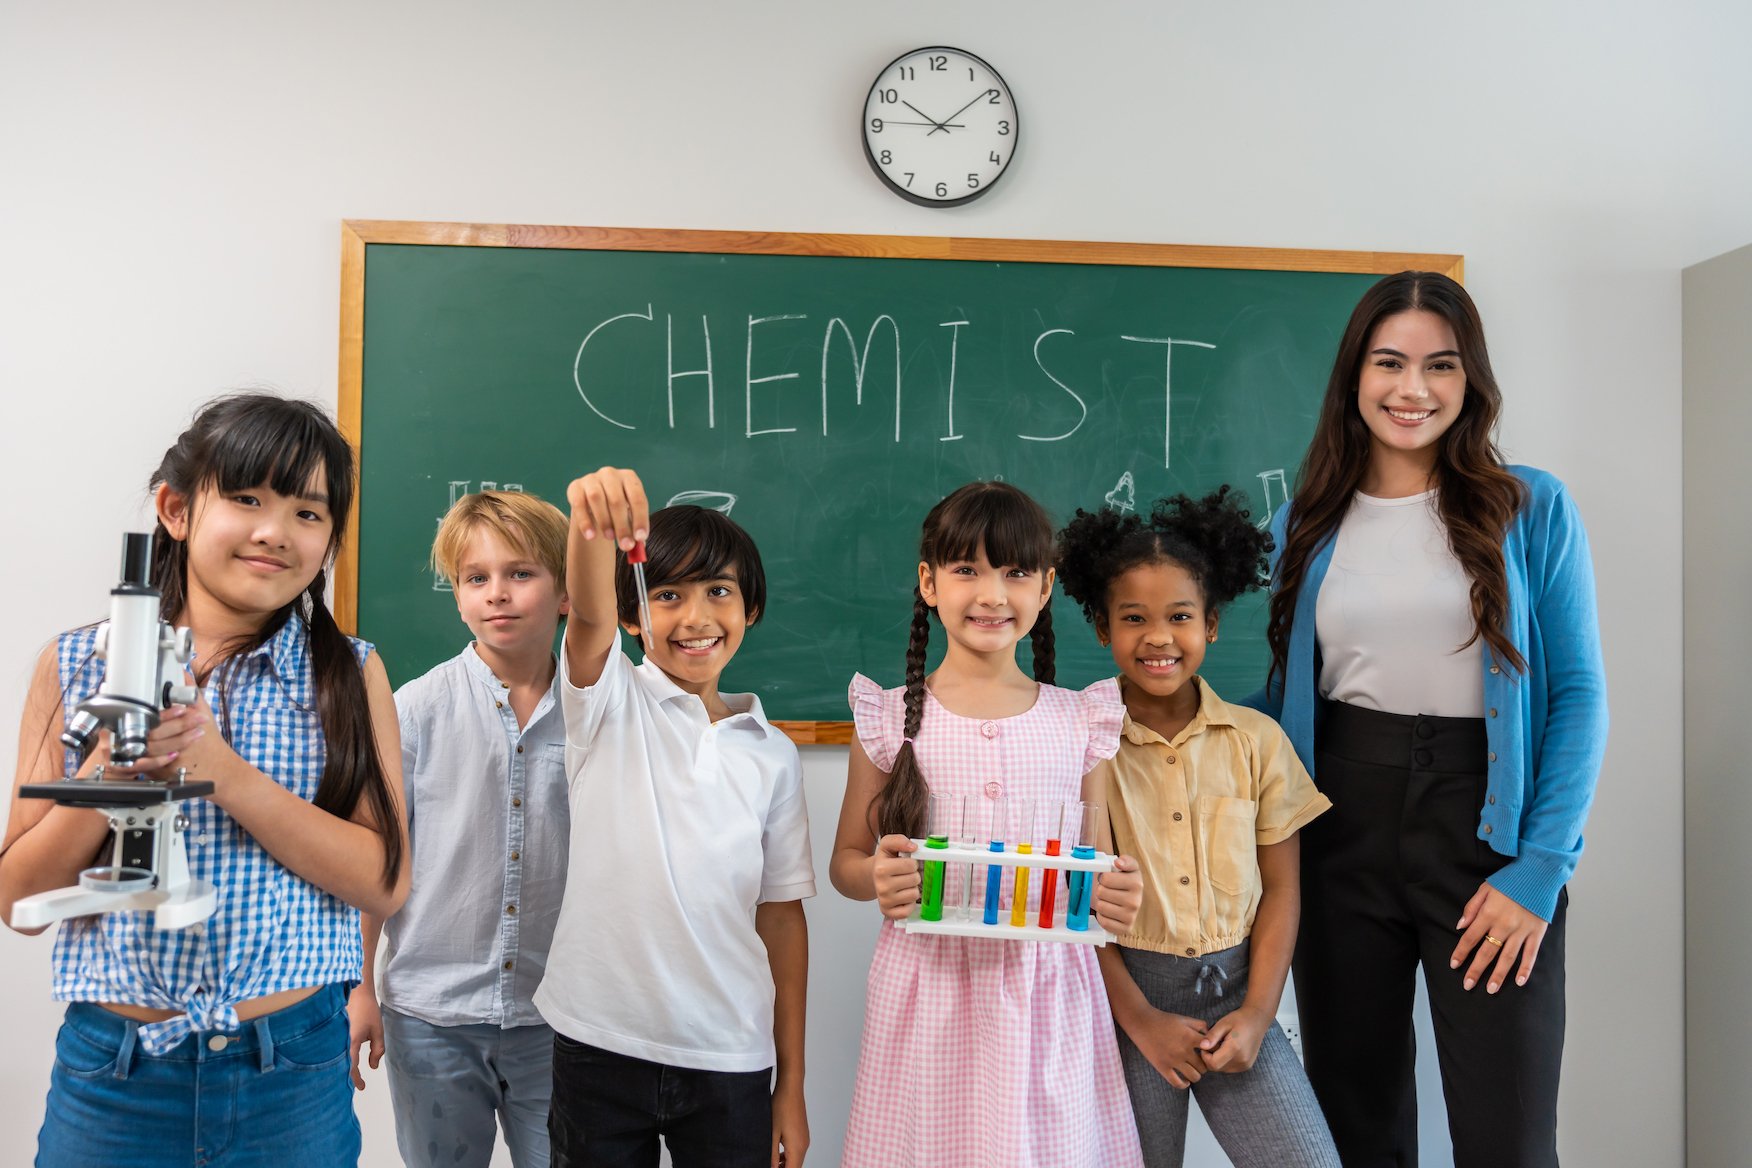 diverse group of school kids with their teacher in front of a chalkboard that says "CHEMIST"